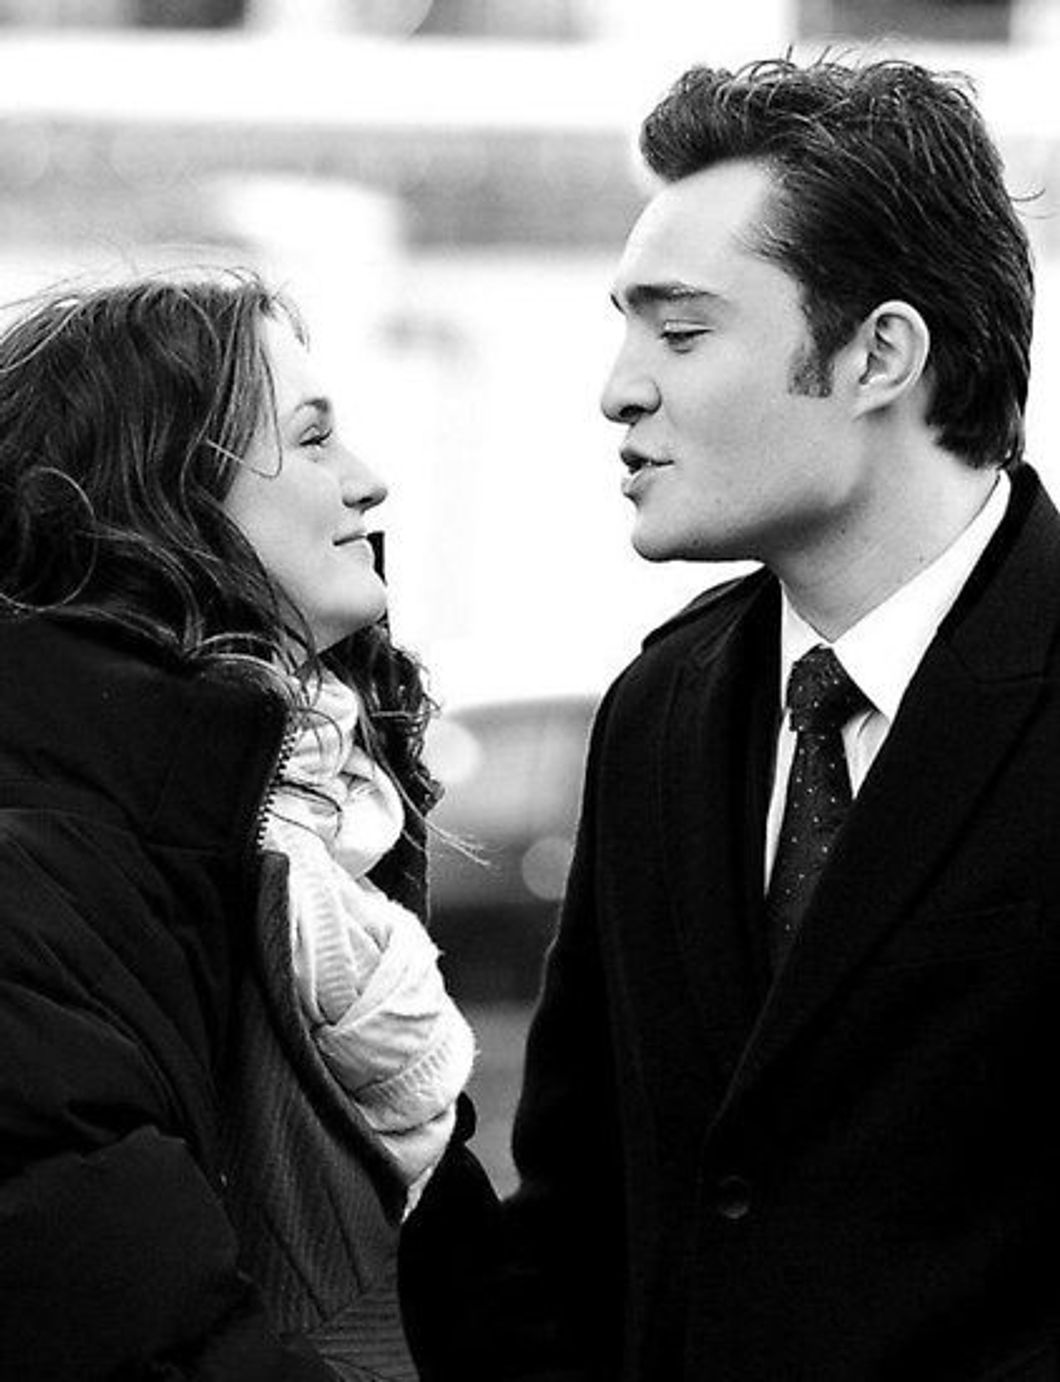 Chuck Bass And The Generation Gap